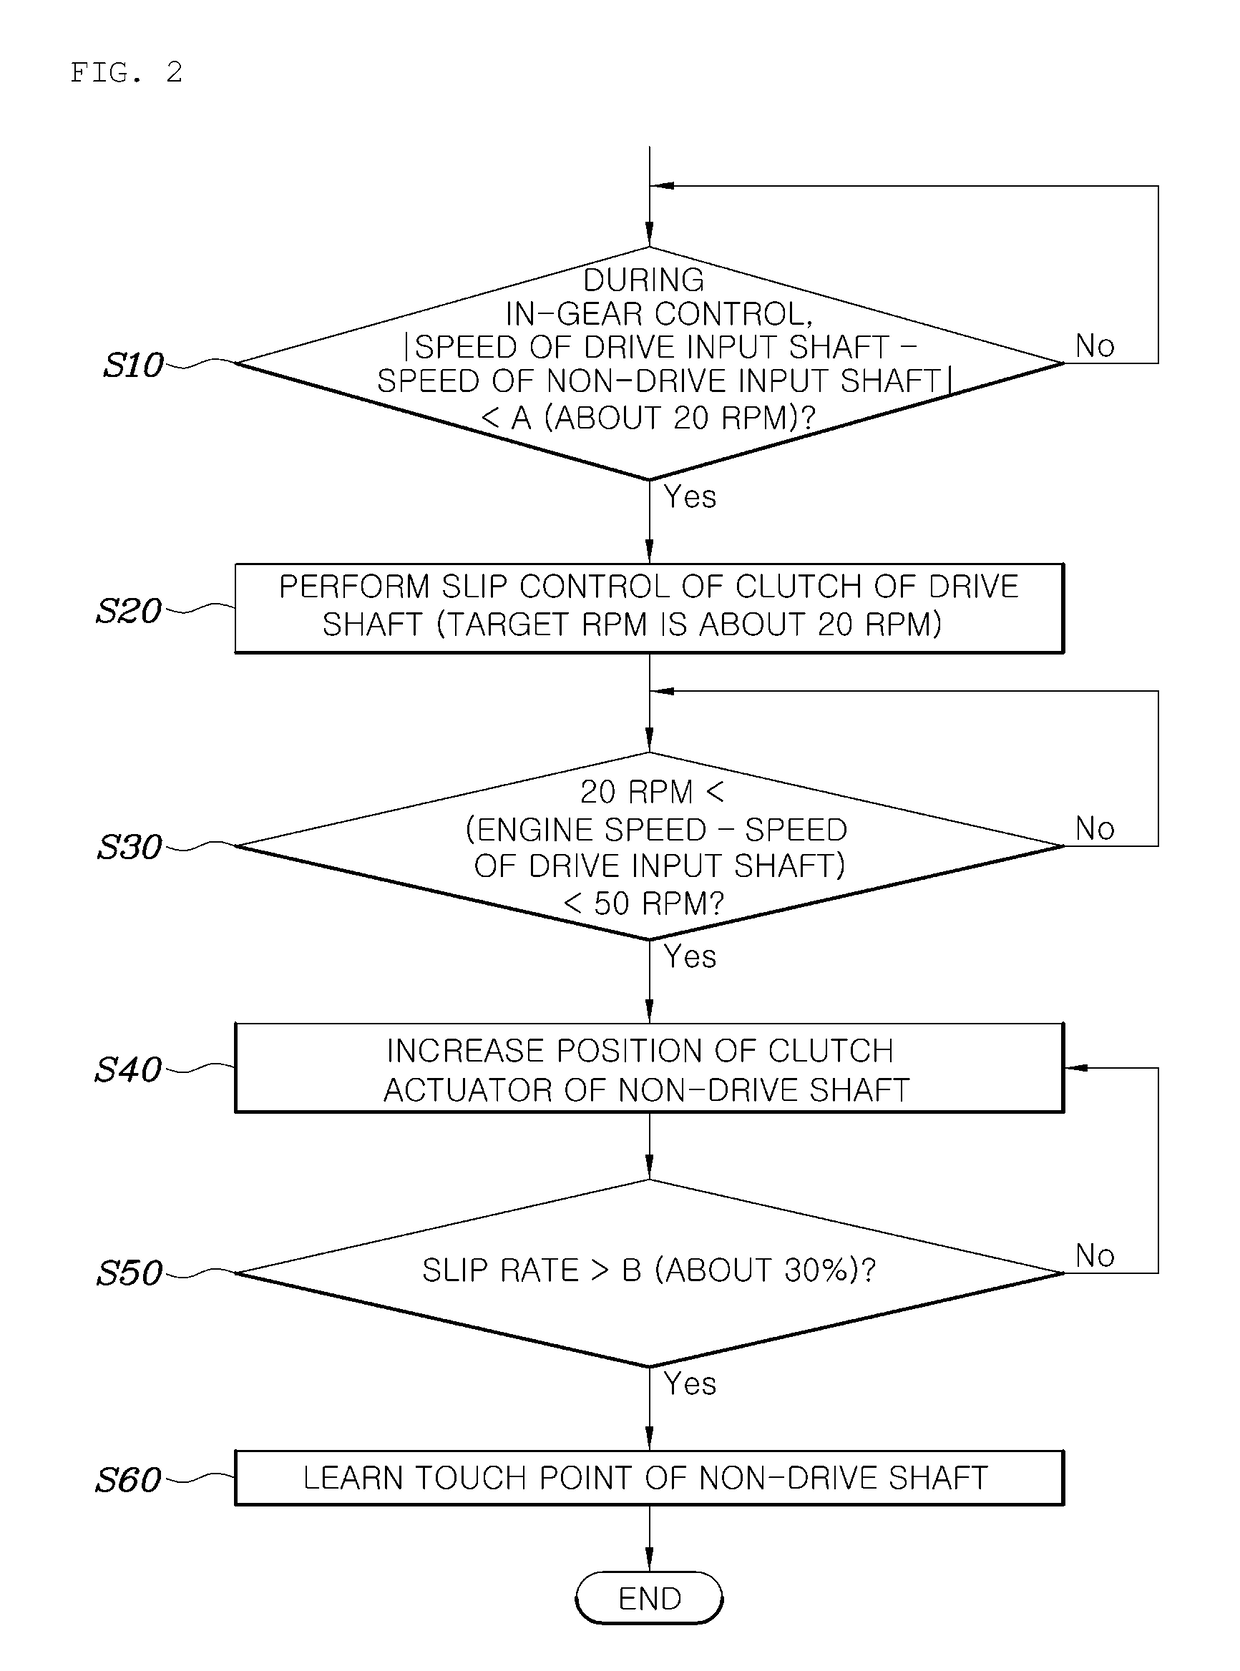 Method for learning touch point of dual clutch transmission